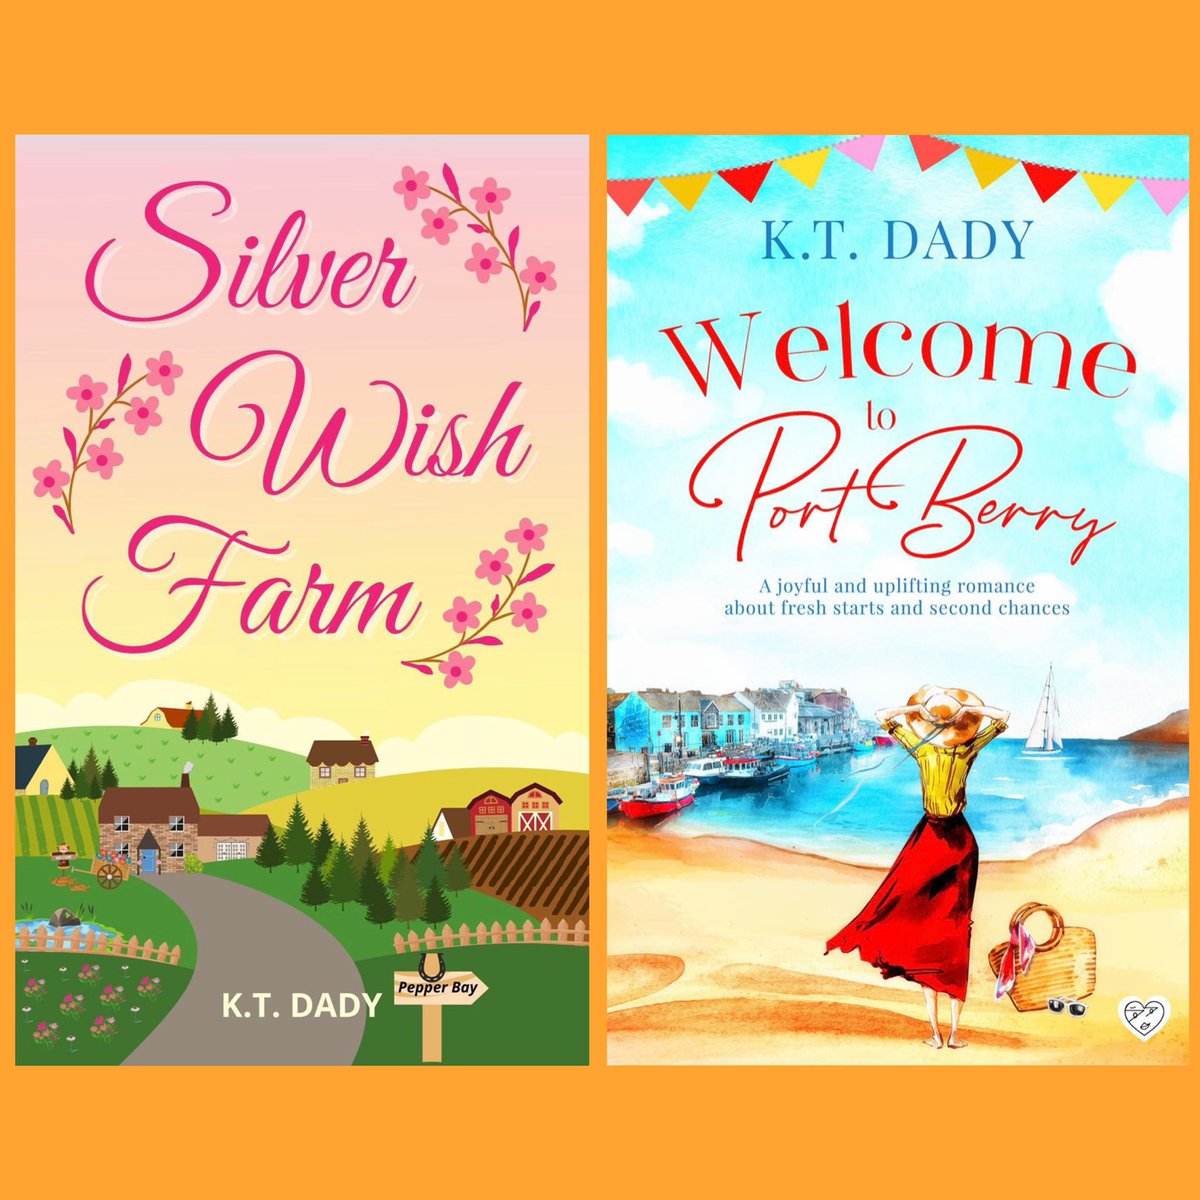 📚My small-town romance books out this month, taking you to the Isle of Wight & Cornwall. Thank you so much to everyone who has downloaded the stories so far. I truly appreciate you.🥰

mybook.to/SilverWishFarm 

mybook.to/PortBerrybook1